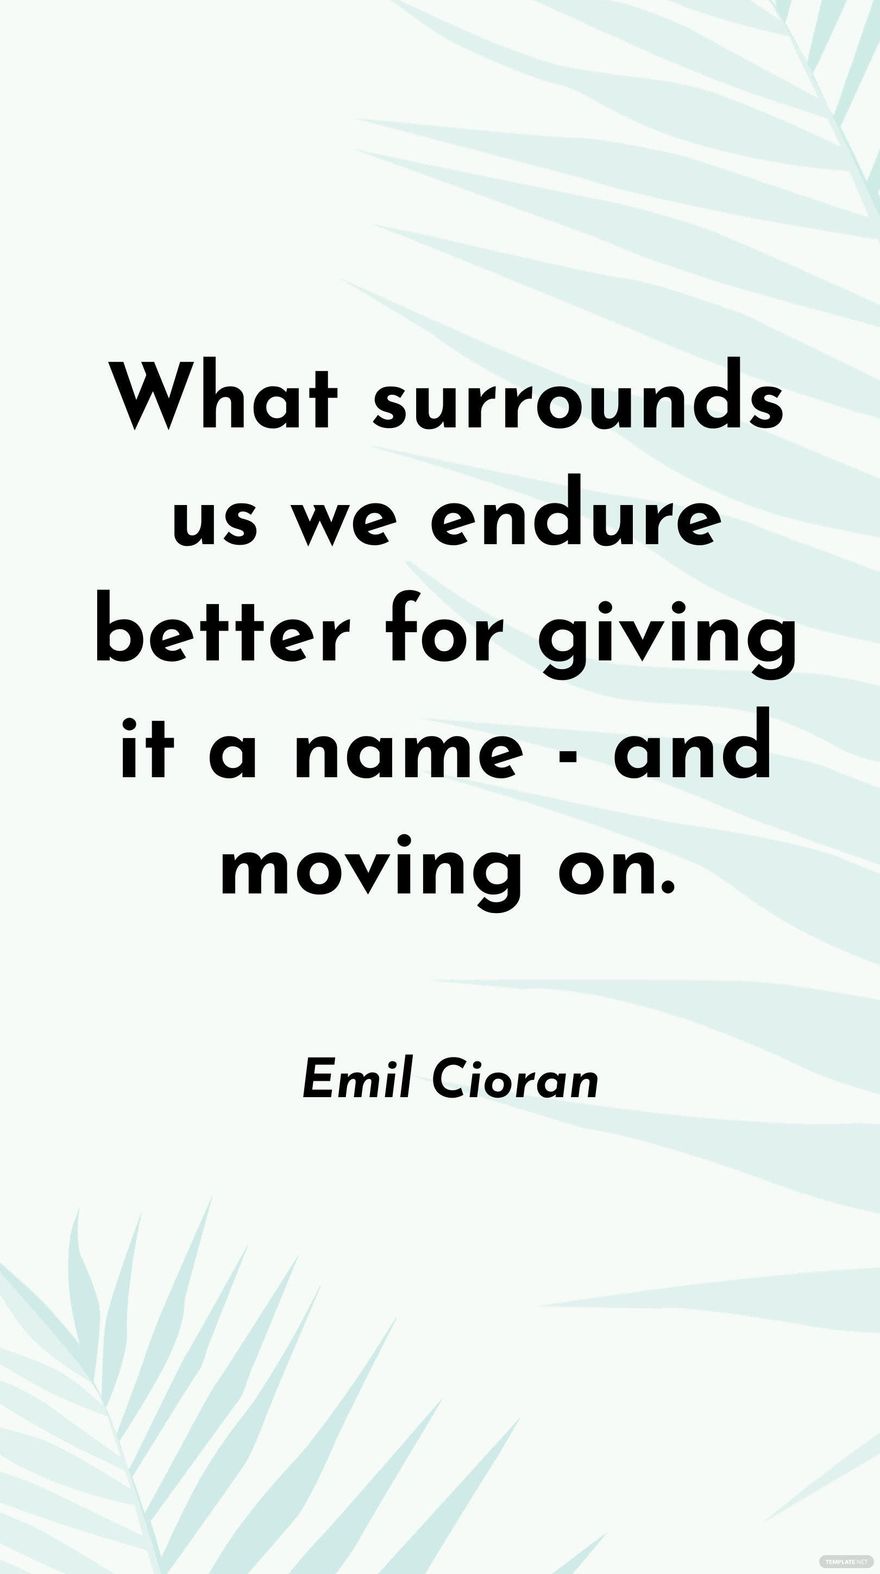 Emil Cioran - What surrounds us we endure better for giving it a name - and moving on.